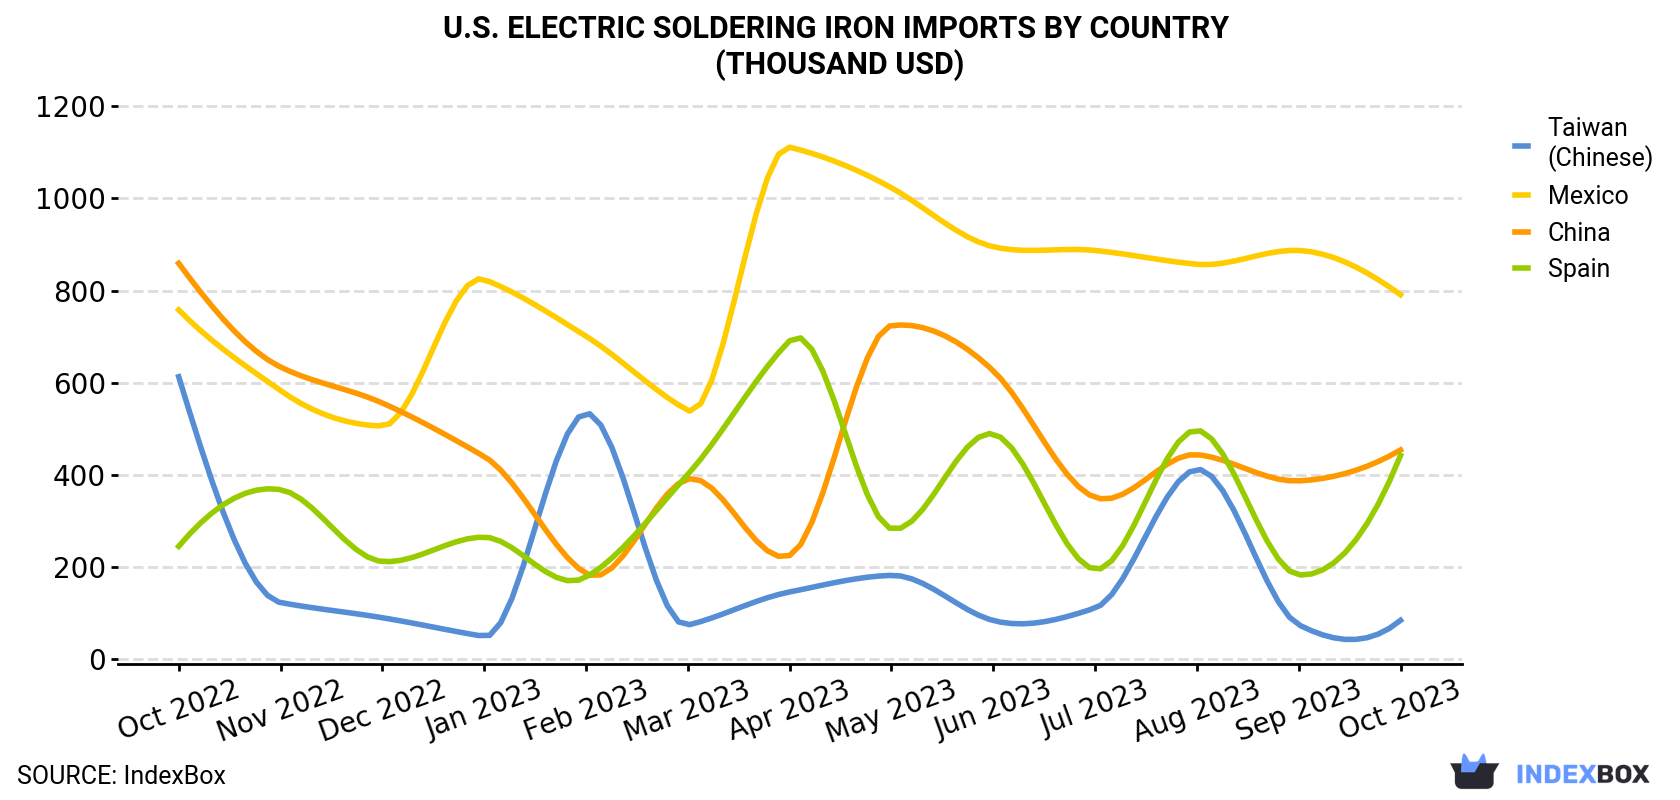 U.S. Electric Soldering Iron Imports By Country (Thousand USD)